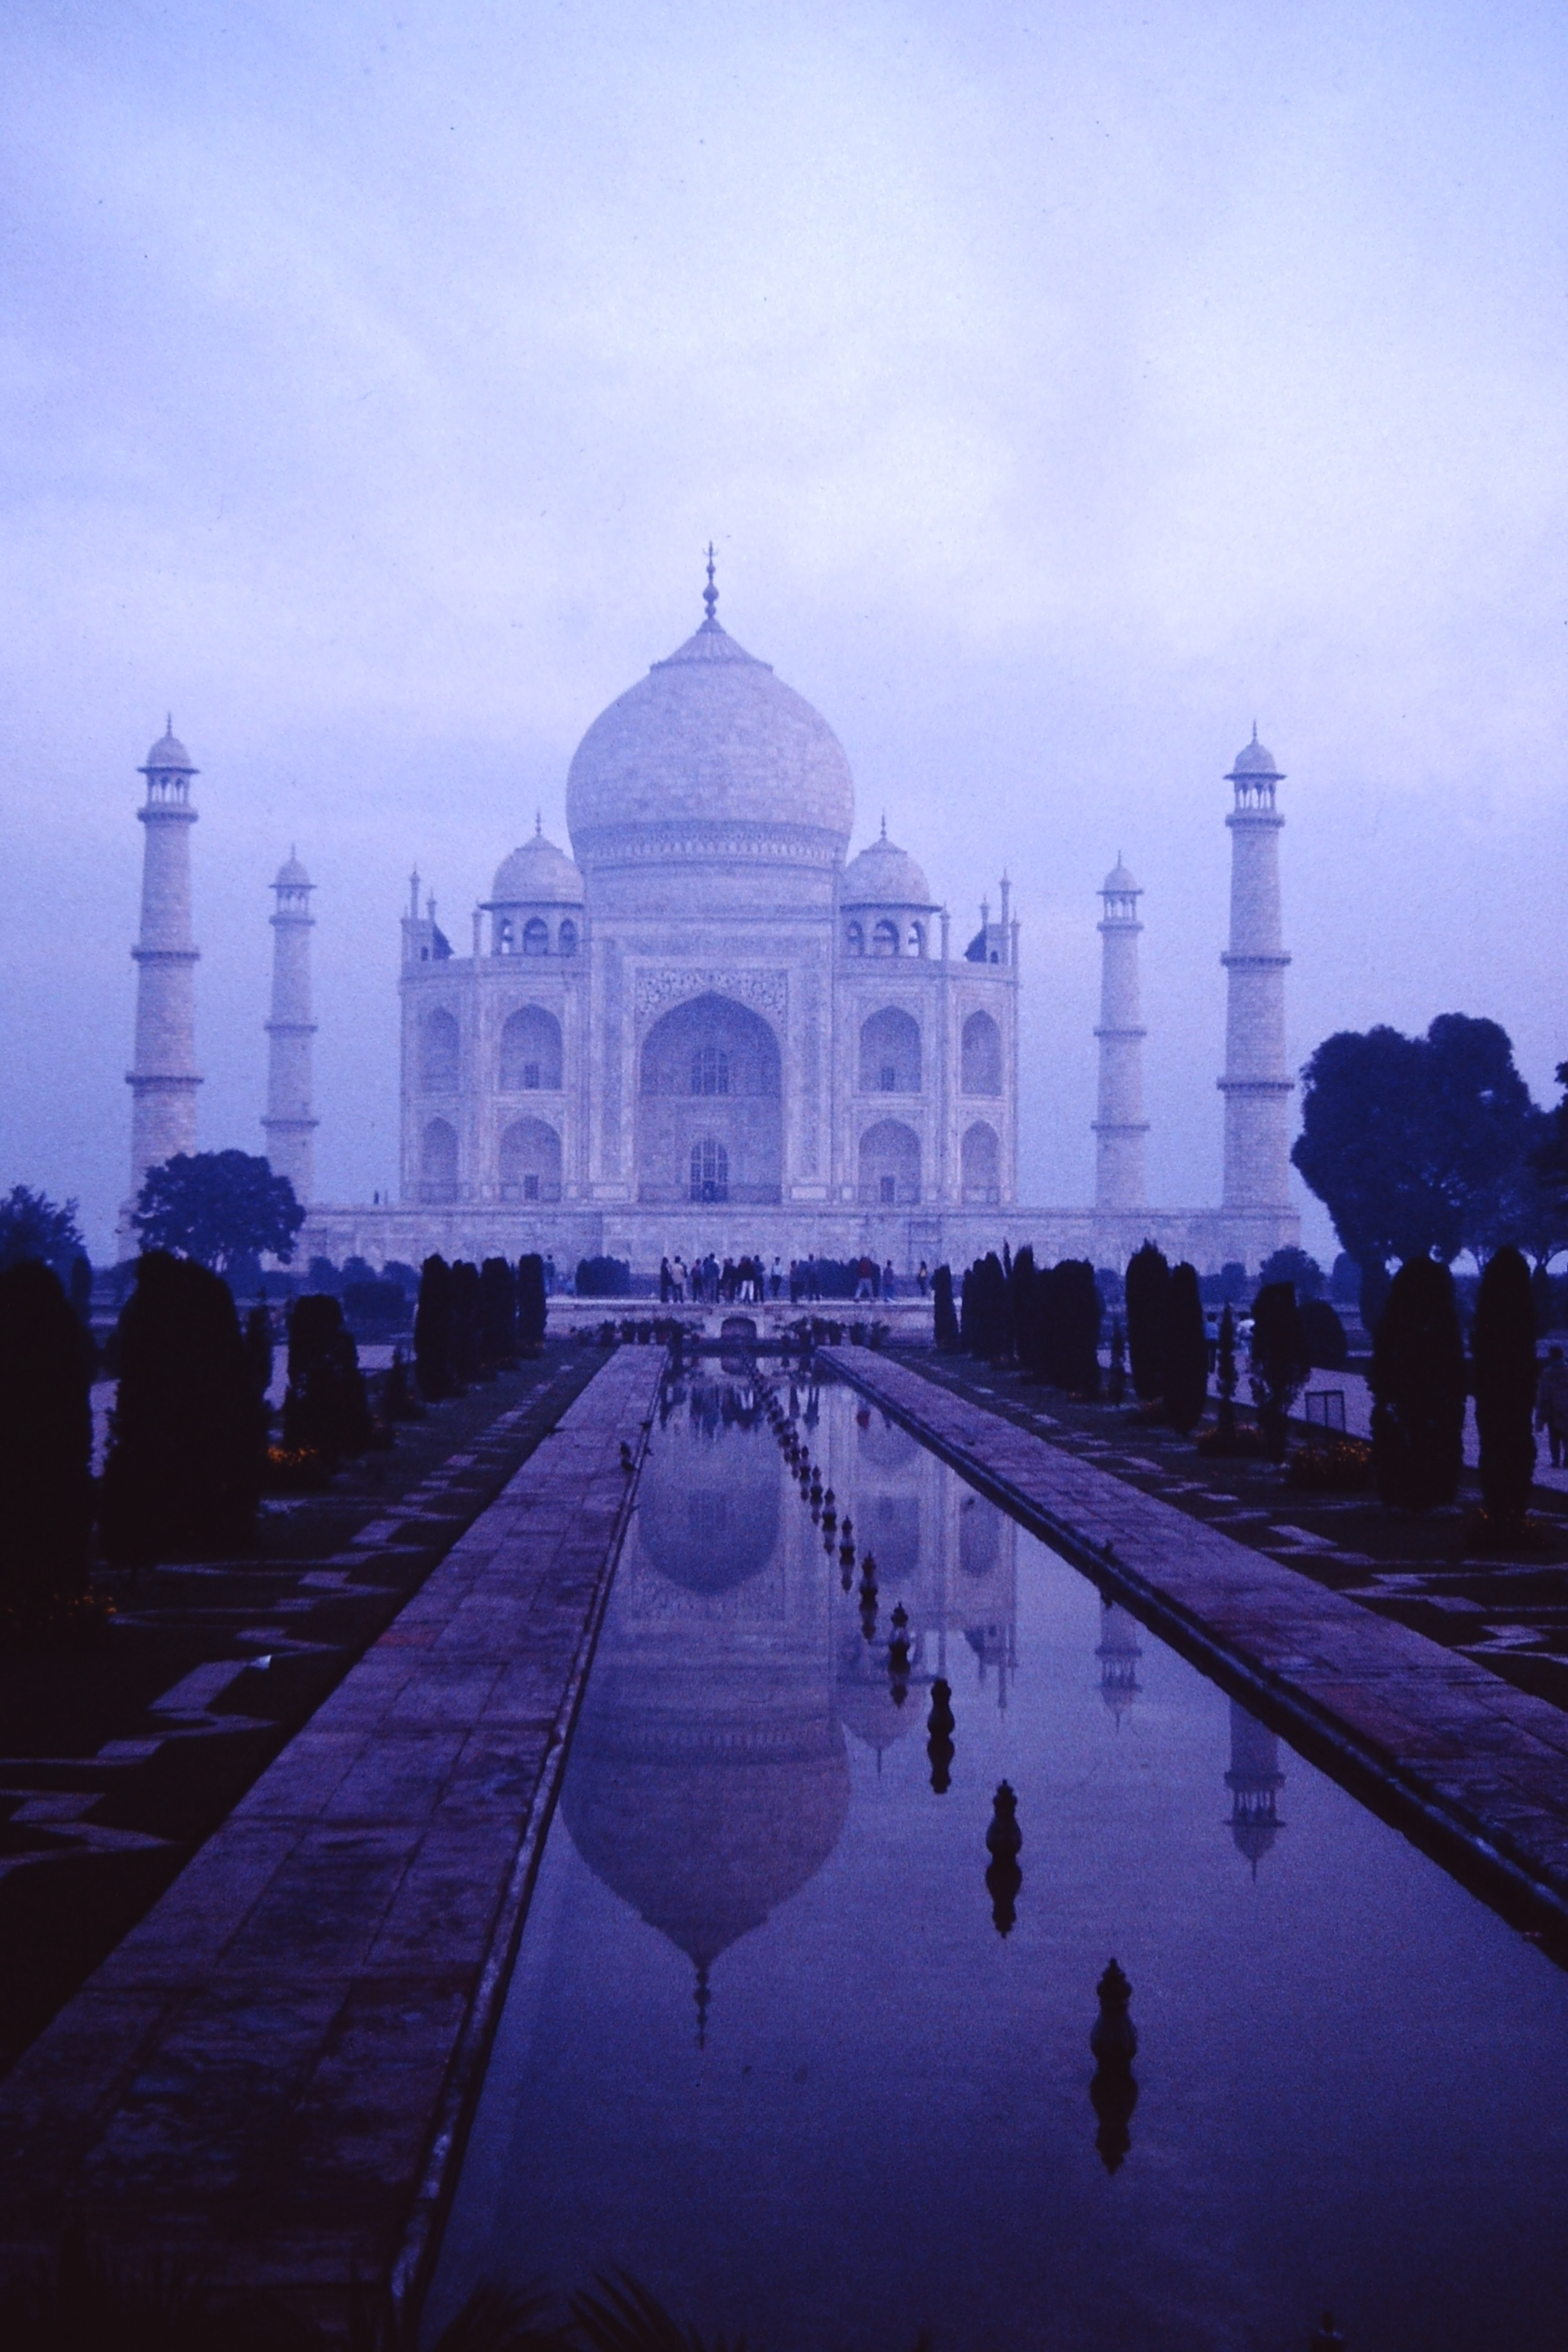 The Taj Mahal, an ivory-white marble mausoleum built in the tradition of traditions of Indo-Islamic and Mughal architecture seen on a misty morning across its reflecting pool.